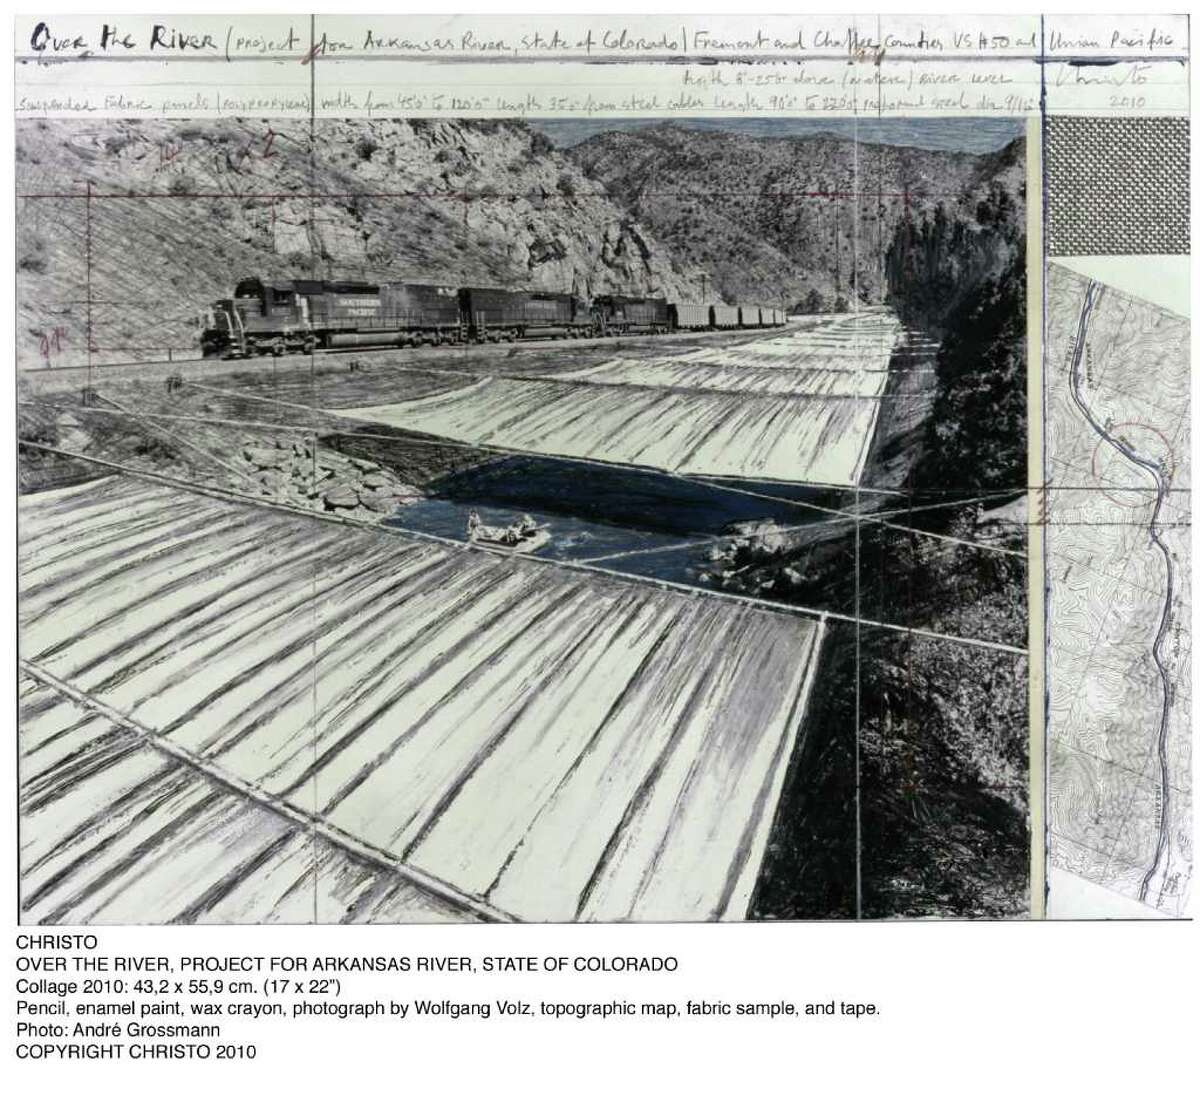 The Westport Arts Center will feature two works in progress by world-famous environmental artists Christo and the late Jeanne-Claude, from Thursday, June 30 through Sunday, Sept. 4. The exhibit includes collages outlining “Over the River, Project for the Arkansas River, State of Colorado” (above) and “The Mastaba, Project for the United Arab Emirates.”